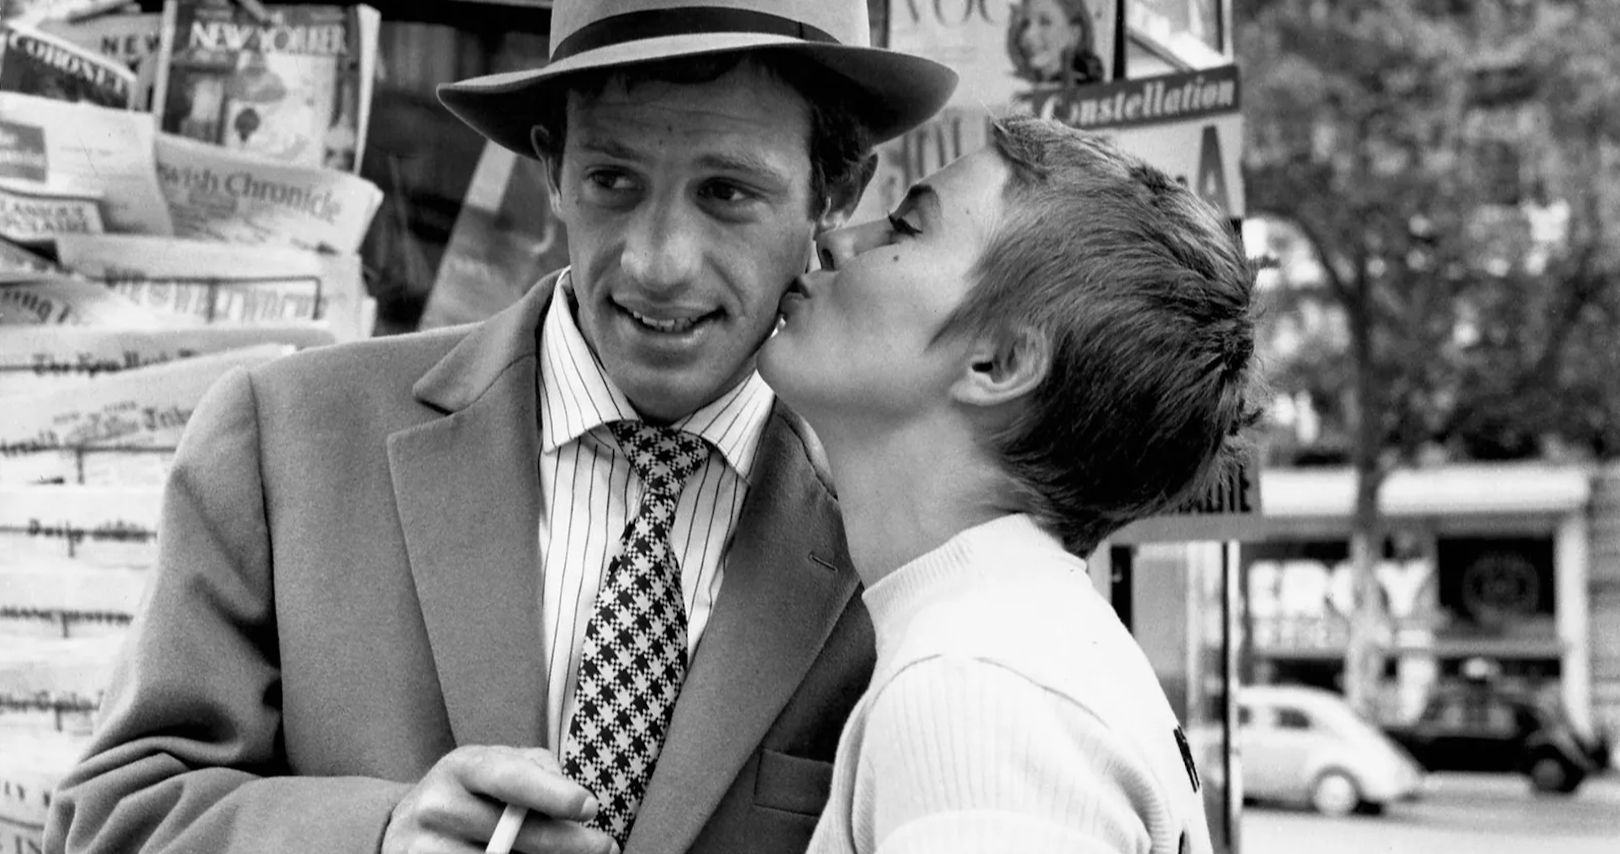 Jean-Paul Belmondo Dies, Breathless Actor and French New Wave Star Was 88